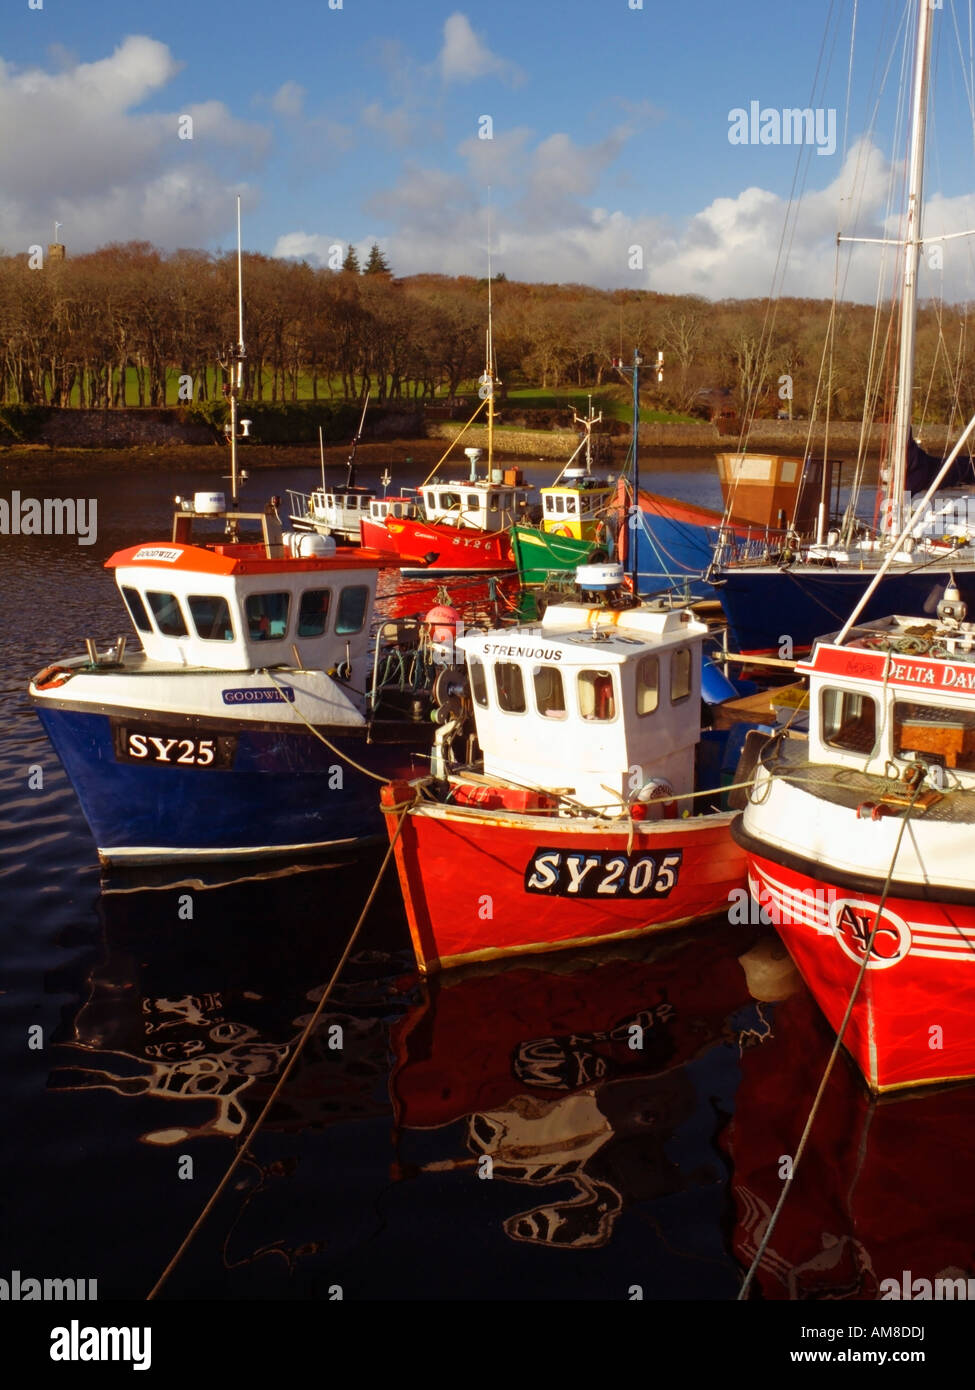 Fishing boats moored Cromwell Street Quay Stornoway Harbour Stornoway Isle of Lewes Outer Hebrides Western Isles Scotland Stock Photo